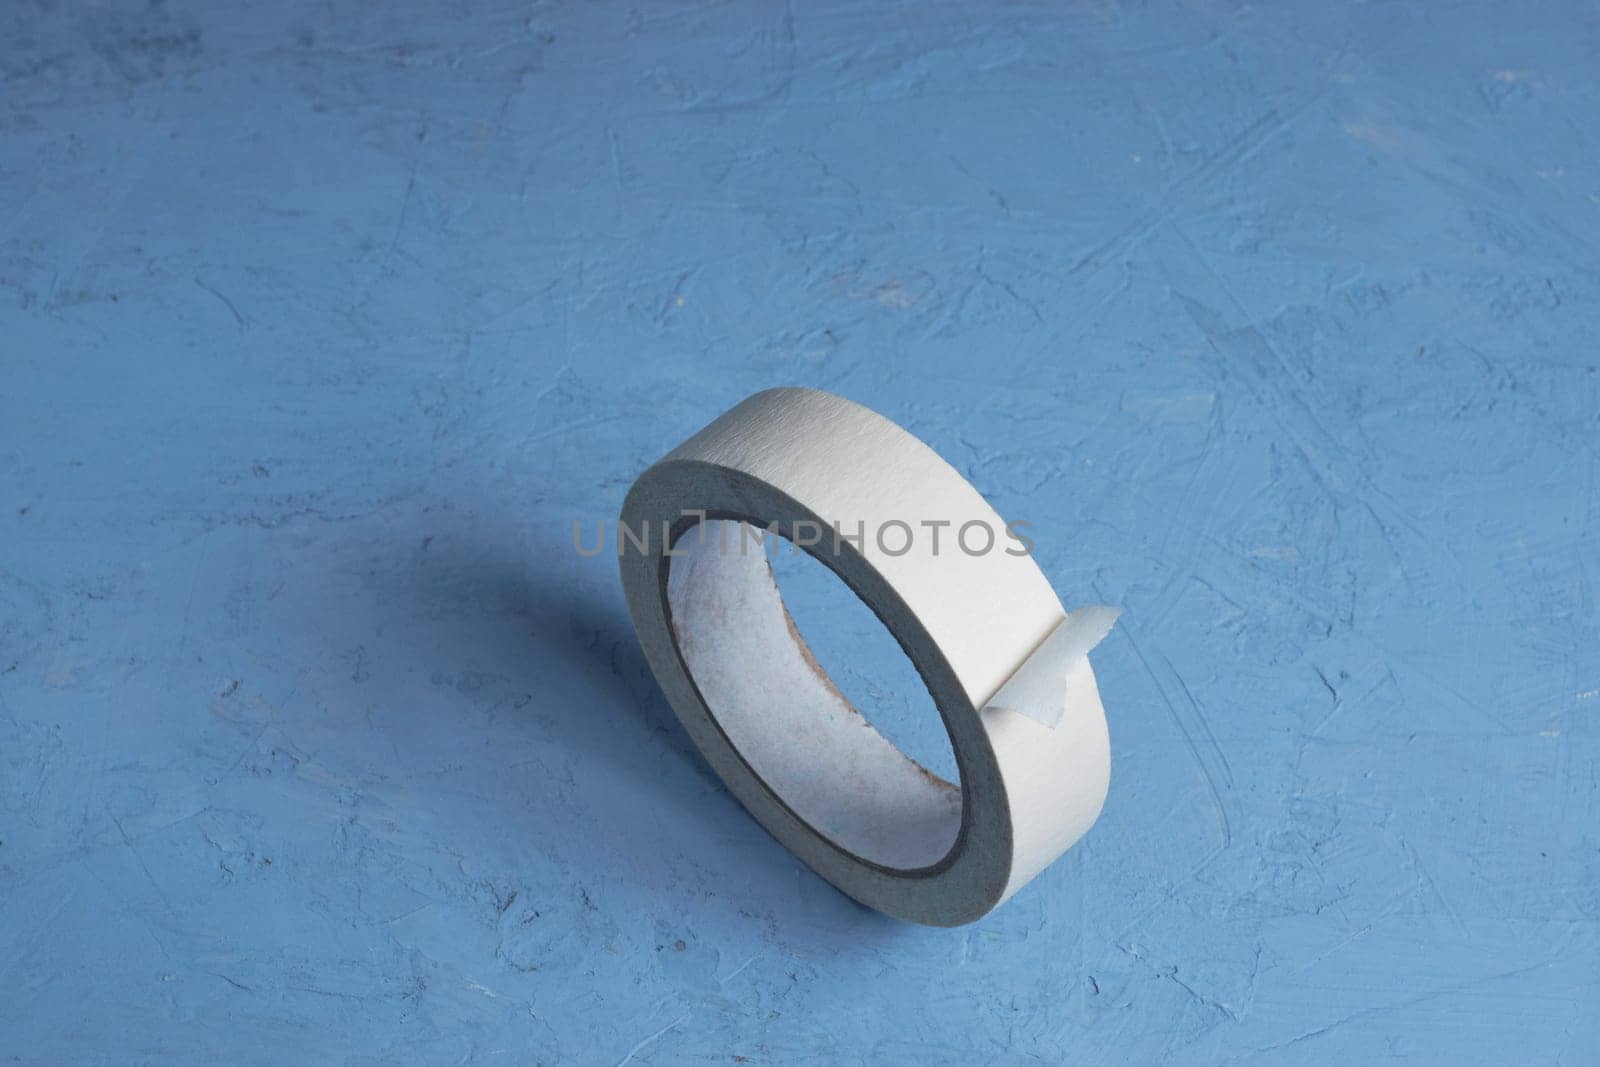 Extreme close-up image of a roll of adhesive tape on a blue background